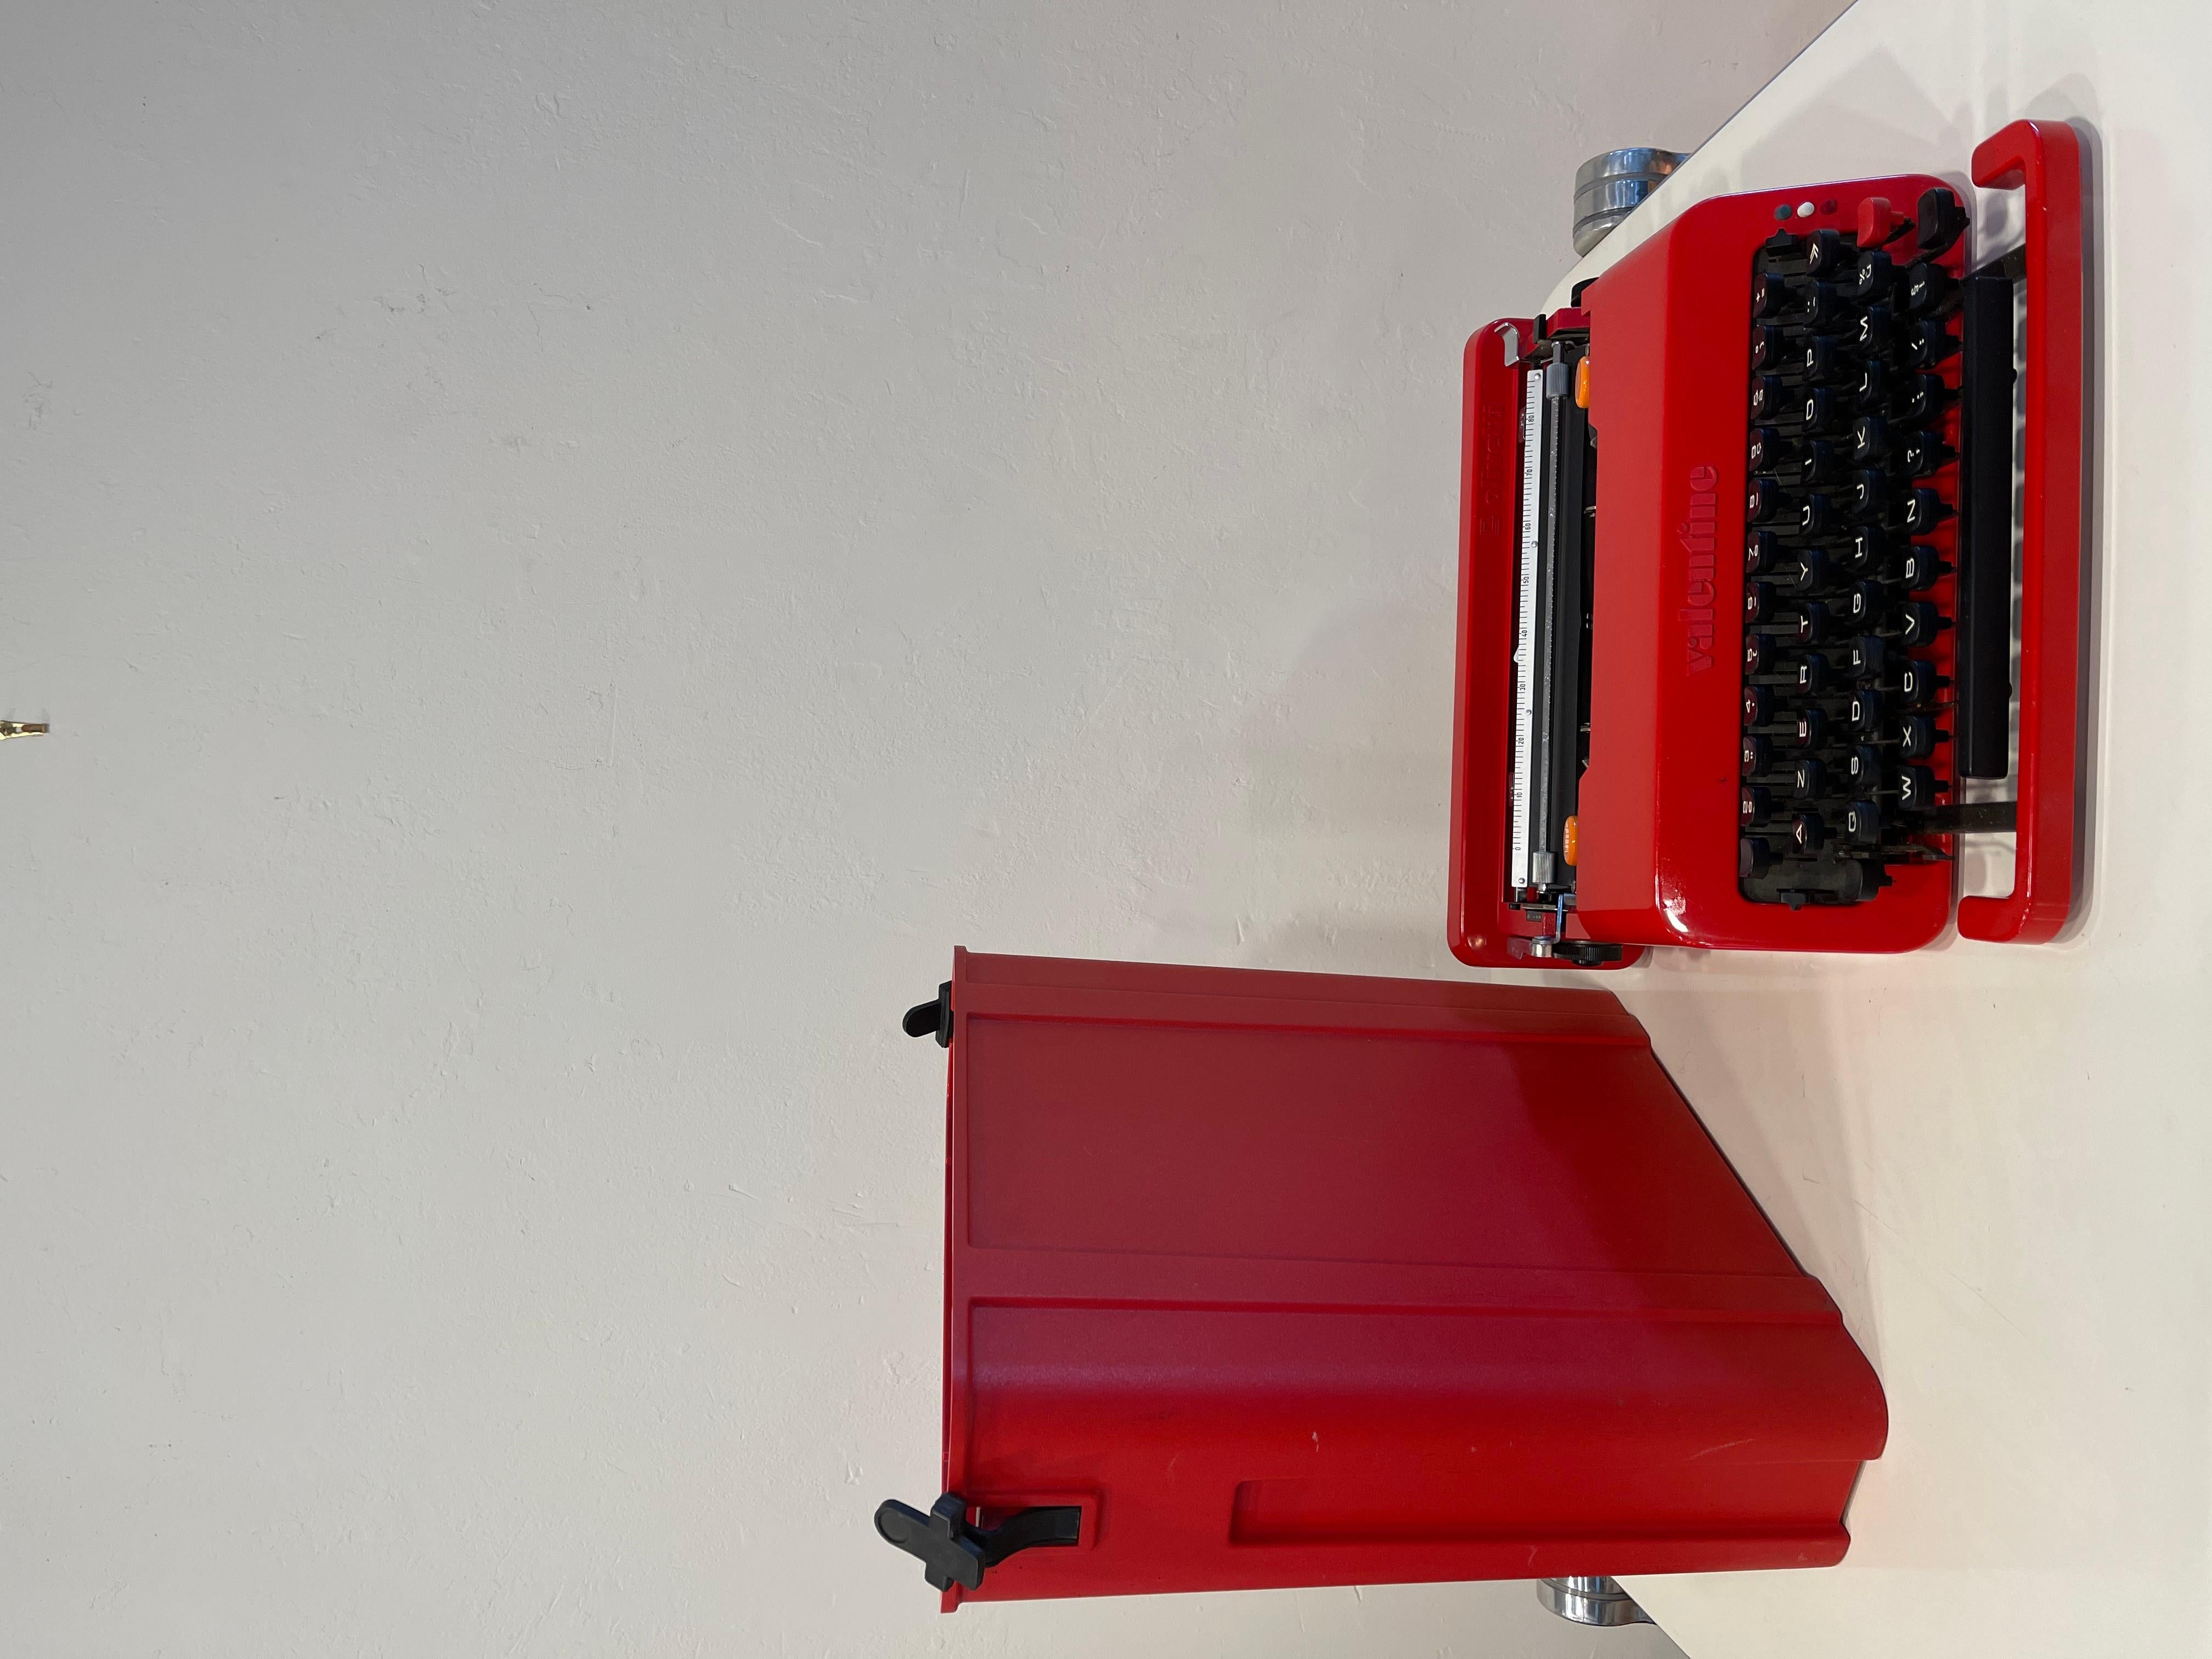 Bright red Ettore Sottsass and Perry King typewriter for Olivetti Synthesis, Italy 1968. Sleek industrial/space age design make this item easily portable via a plastic carrying case. Very good condition with only a couple small marks on the case.